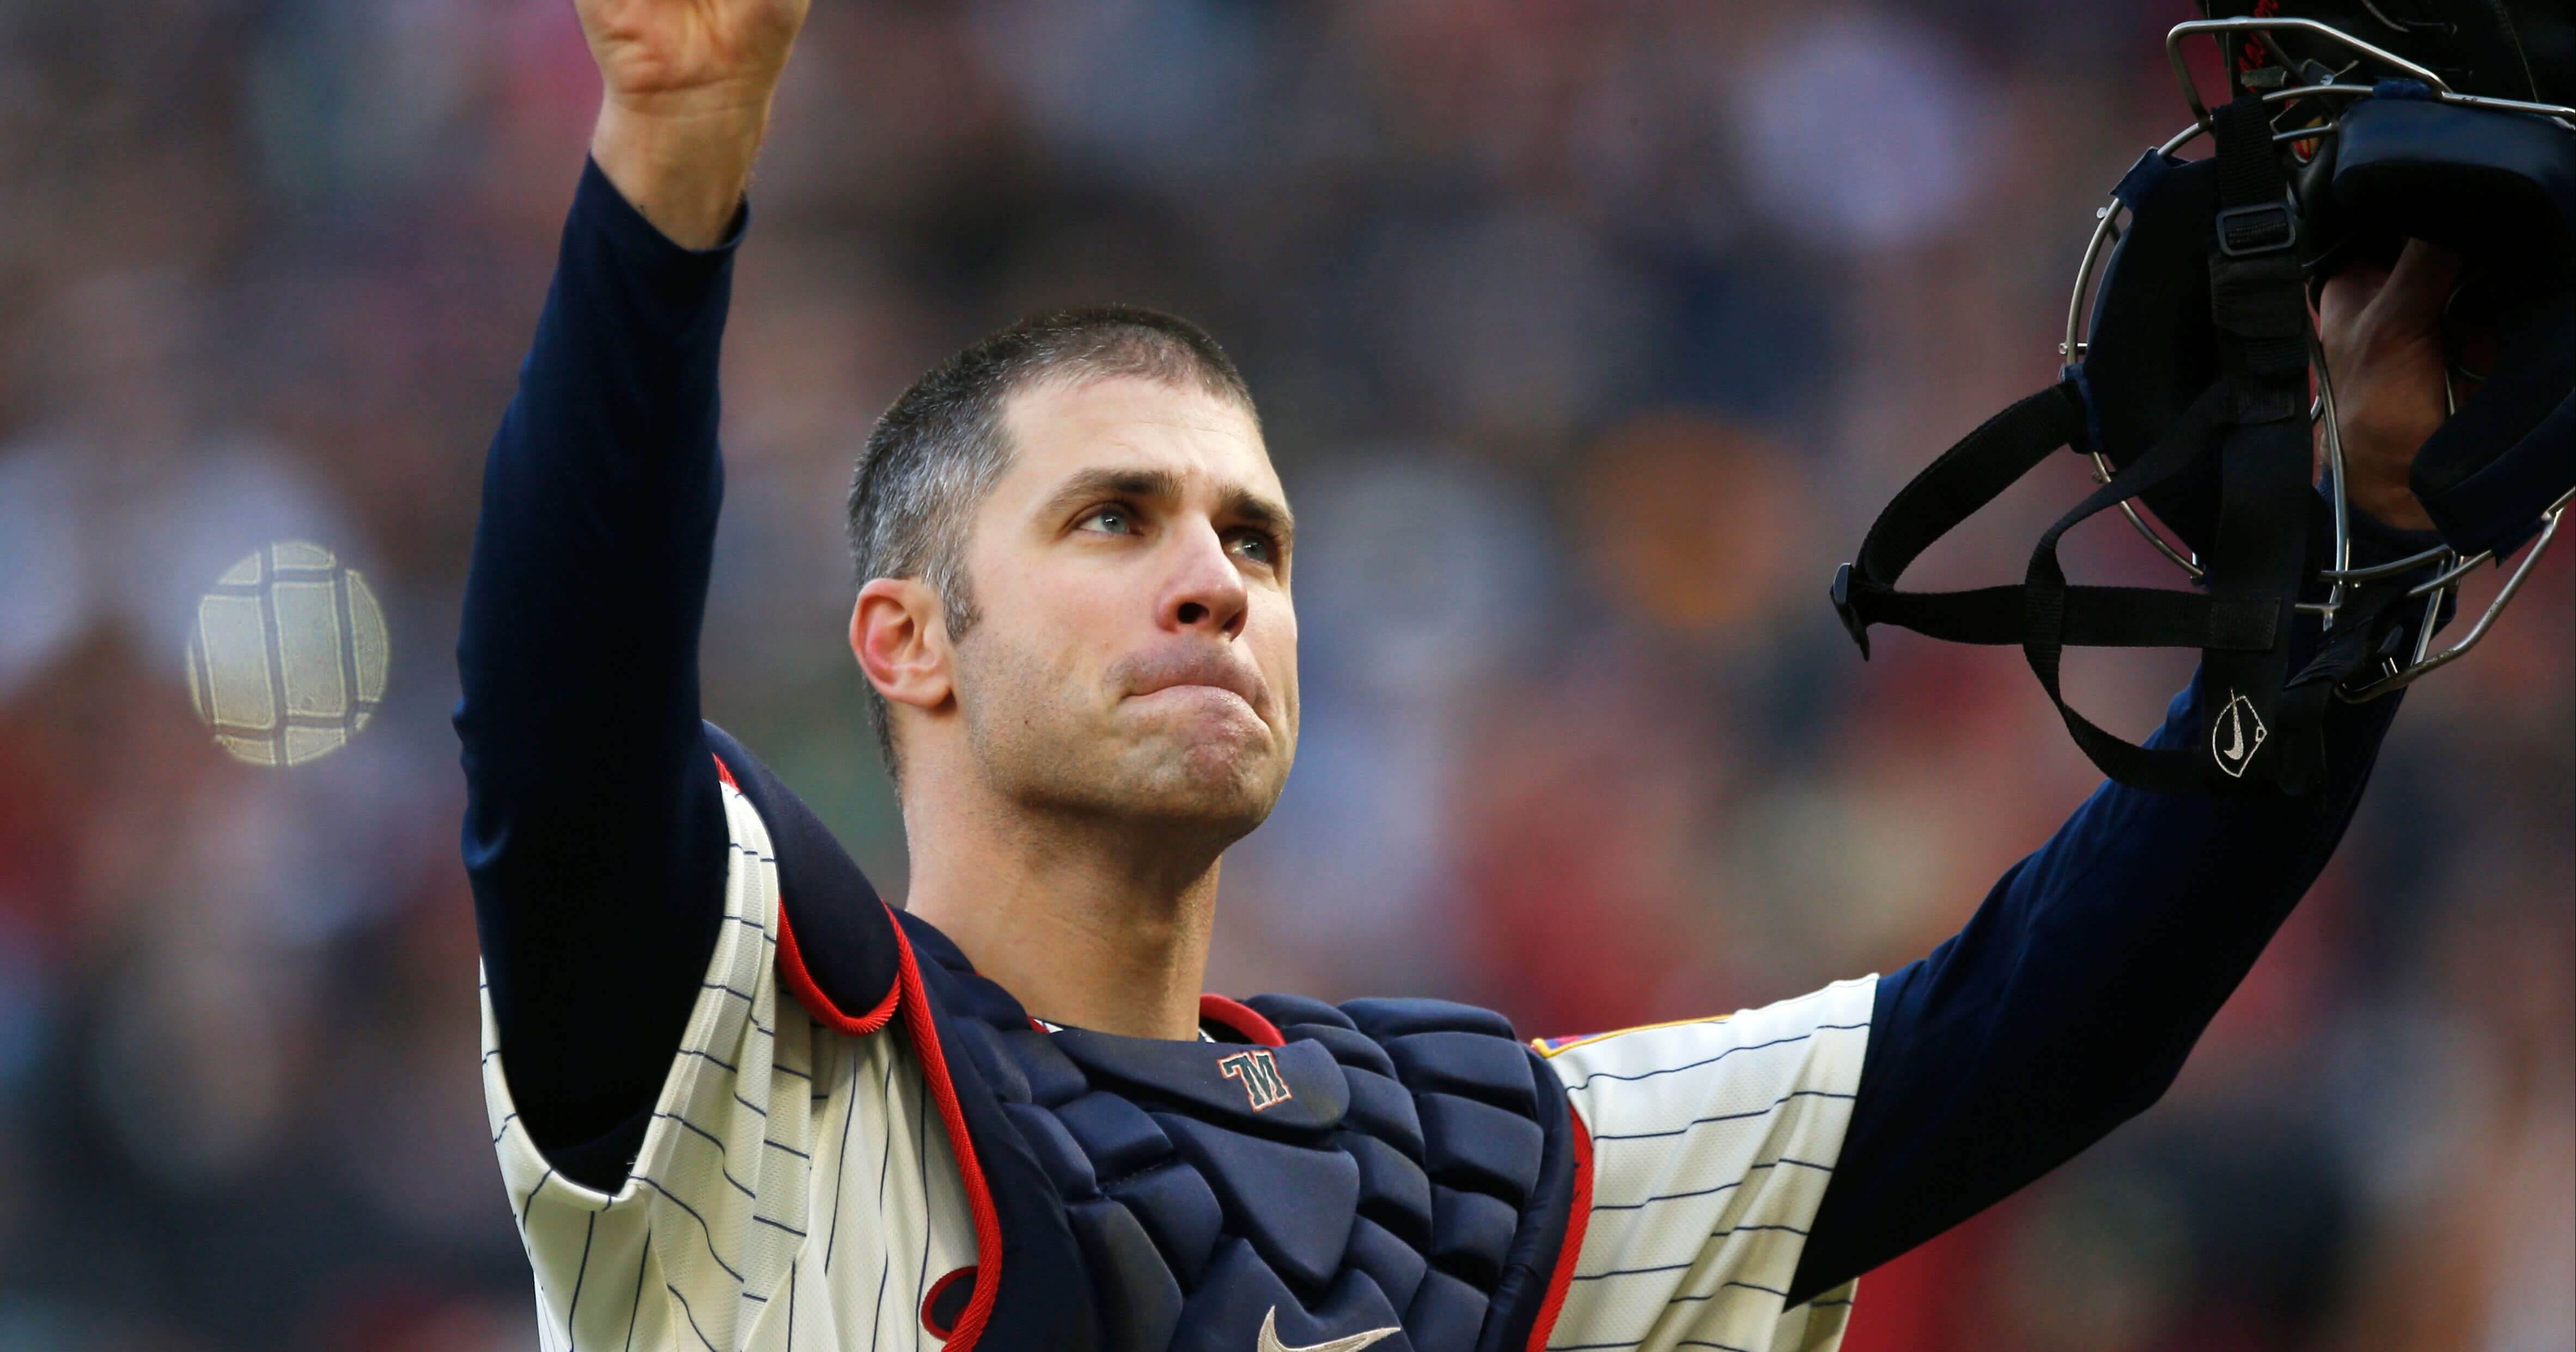 Minnesota Twins' Joe Mauer acknowledges a standing ovation Sept. 30 as he donned catcher's gear and caught for one pitch against a Chicago White Sox batter in the ninth inning of a game in Minneapolis.